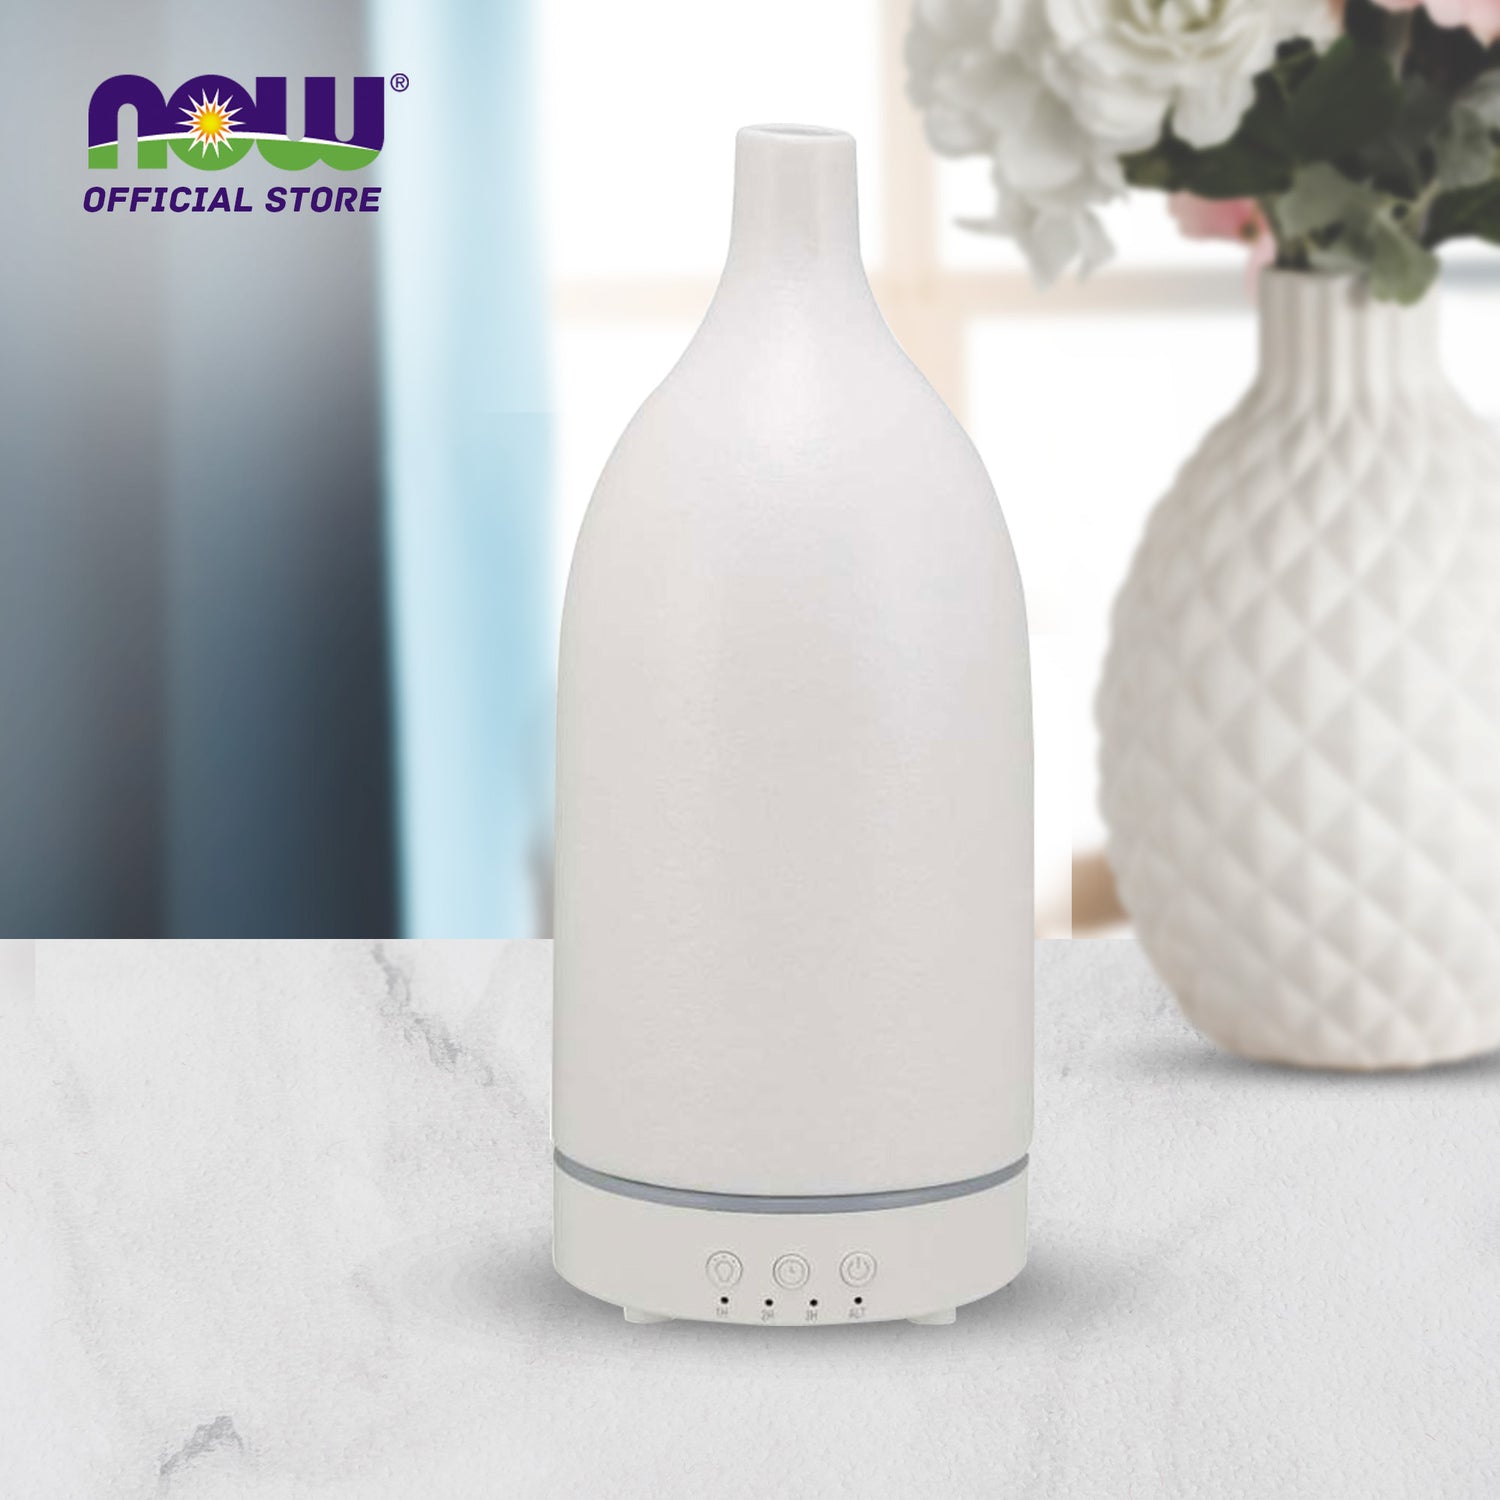 NOW Essential Oils, Ultrasonic Ceramic Stone Oil Diffuser, Extremely Quiet, Easy To Clean - Bloom Concept